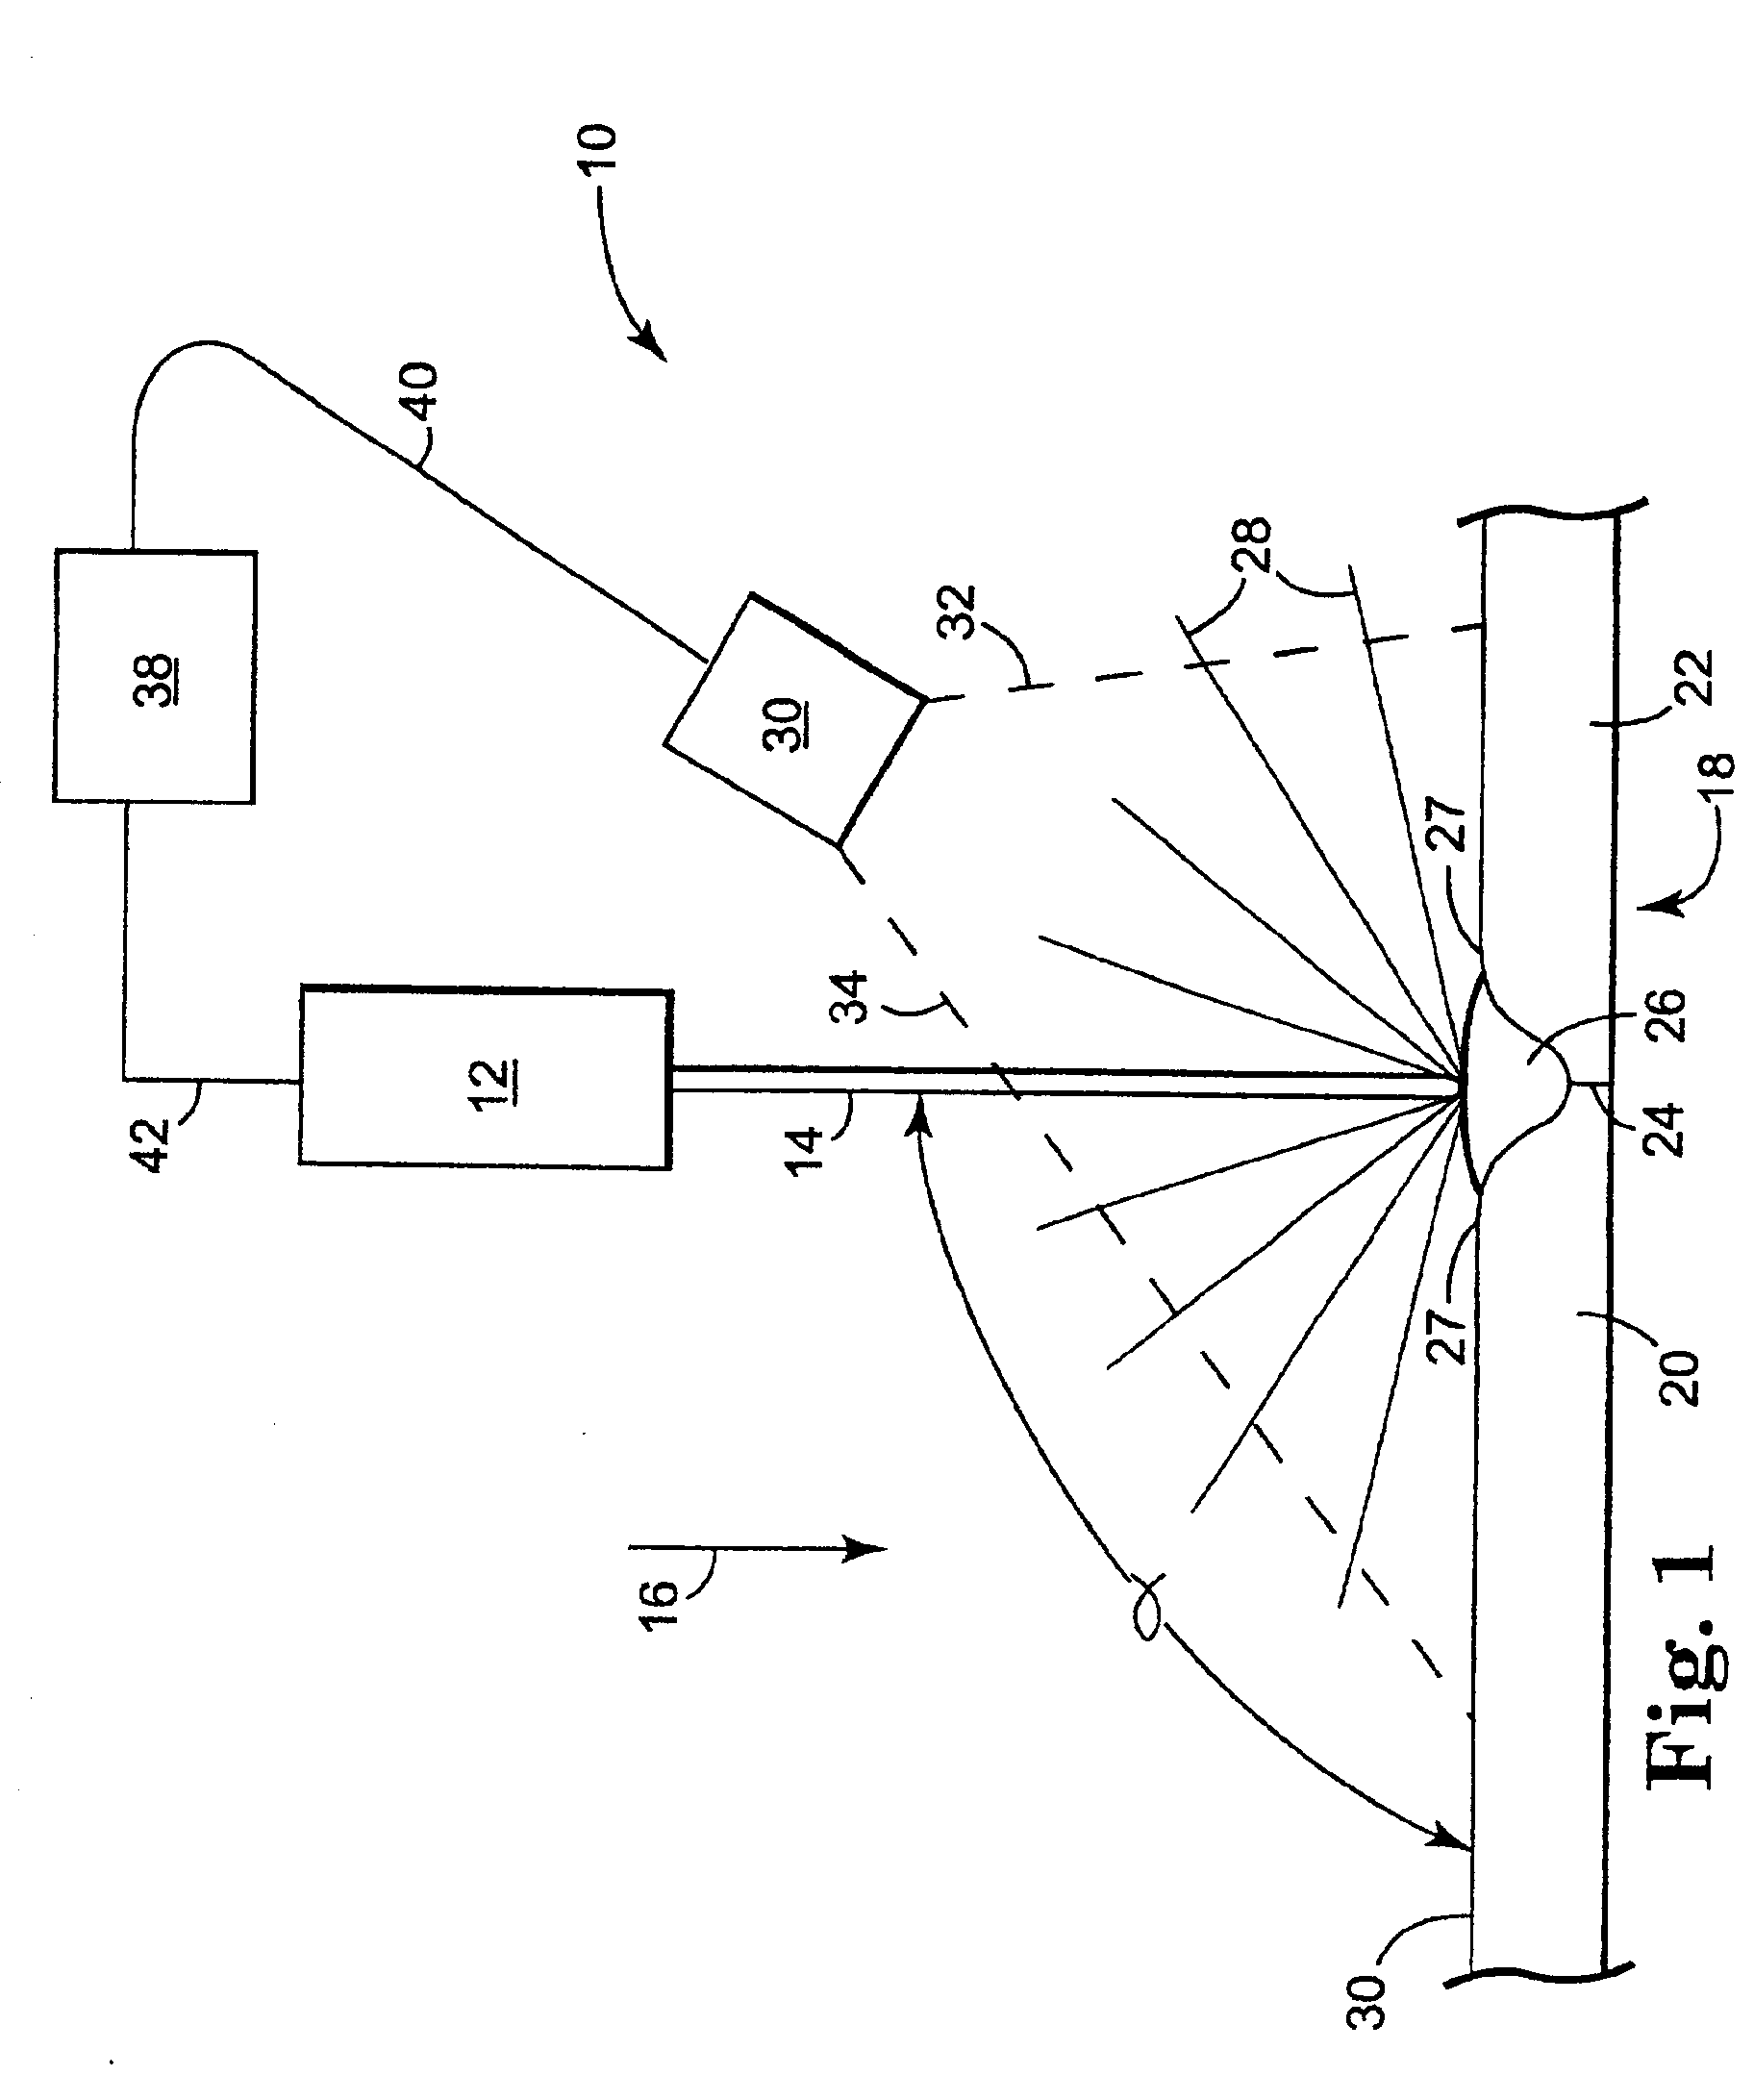 Apparatus and method for closed-loop control of laser welder for welding polymeric catheter components